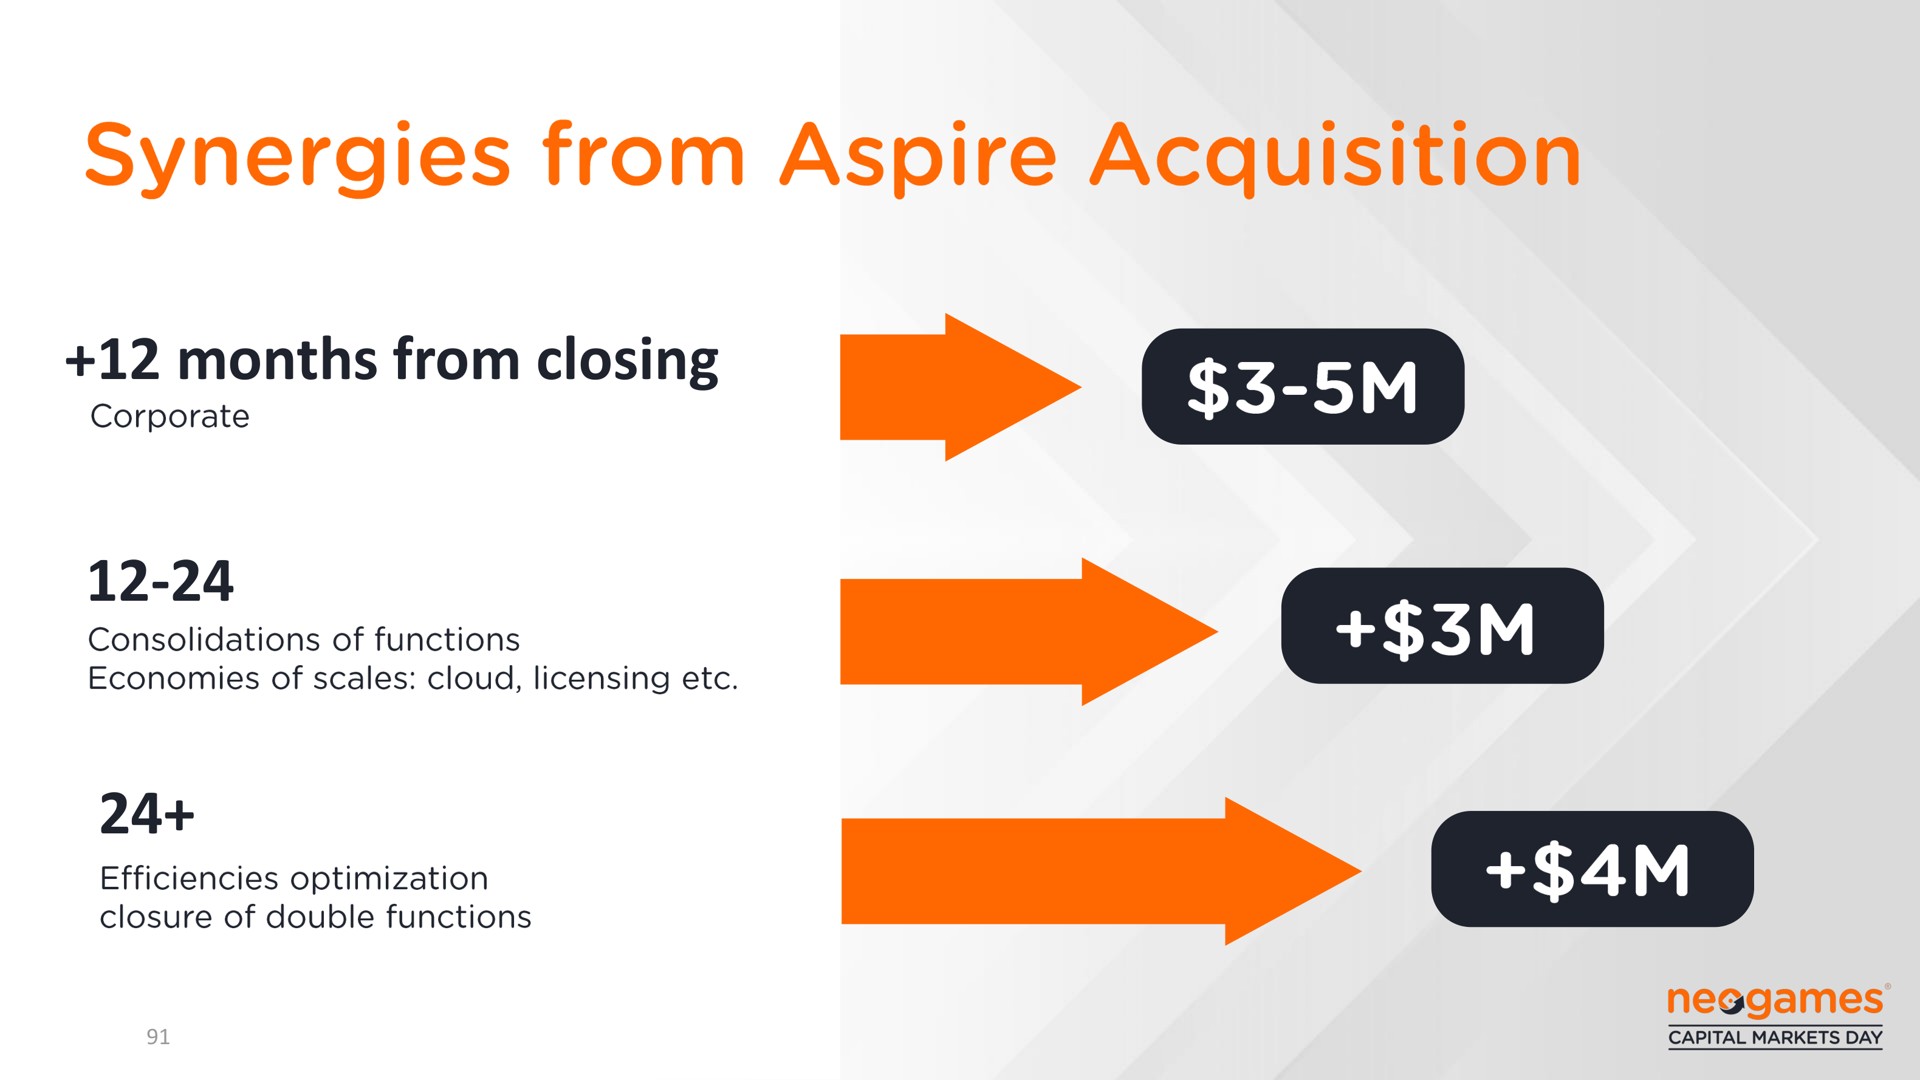 months from closing synergies aspire acquisition | Neogames